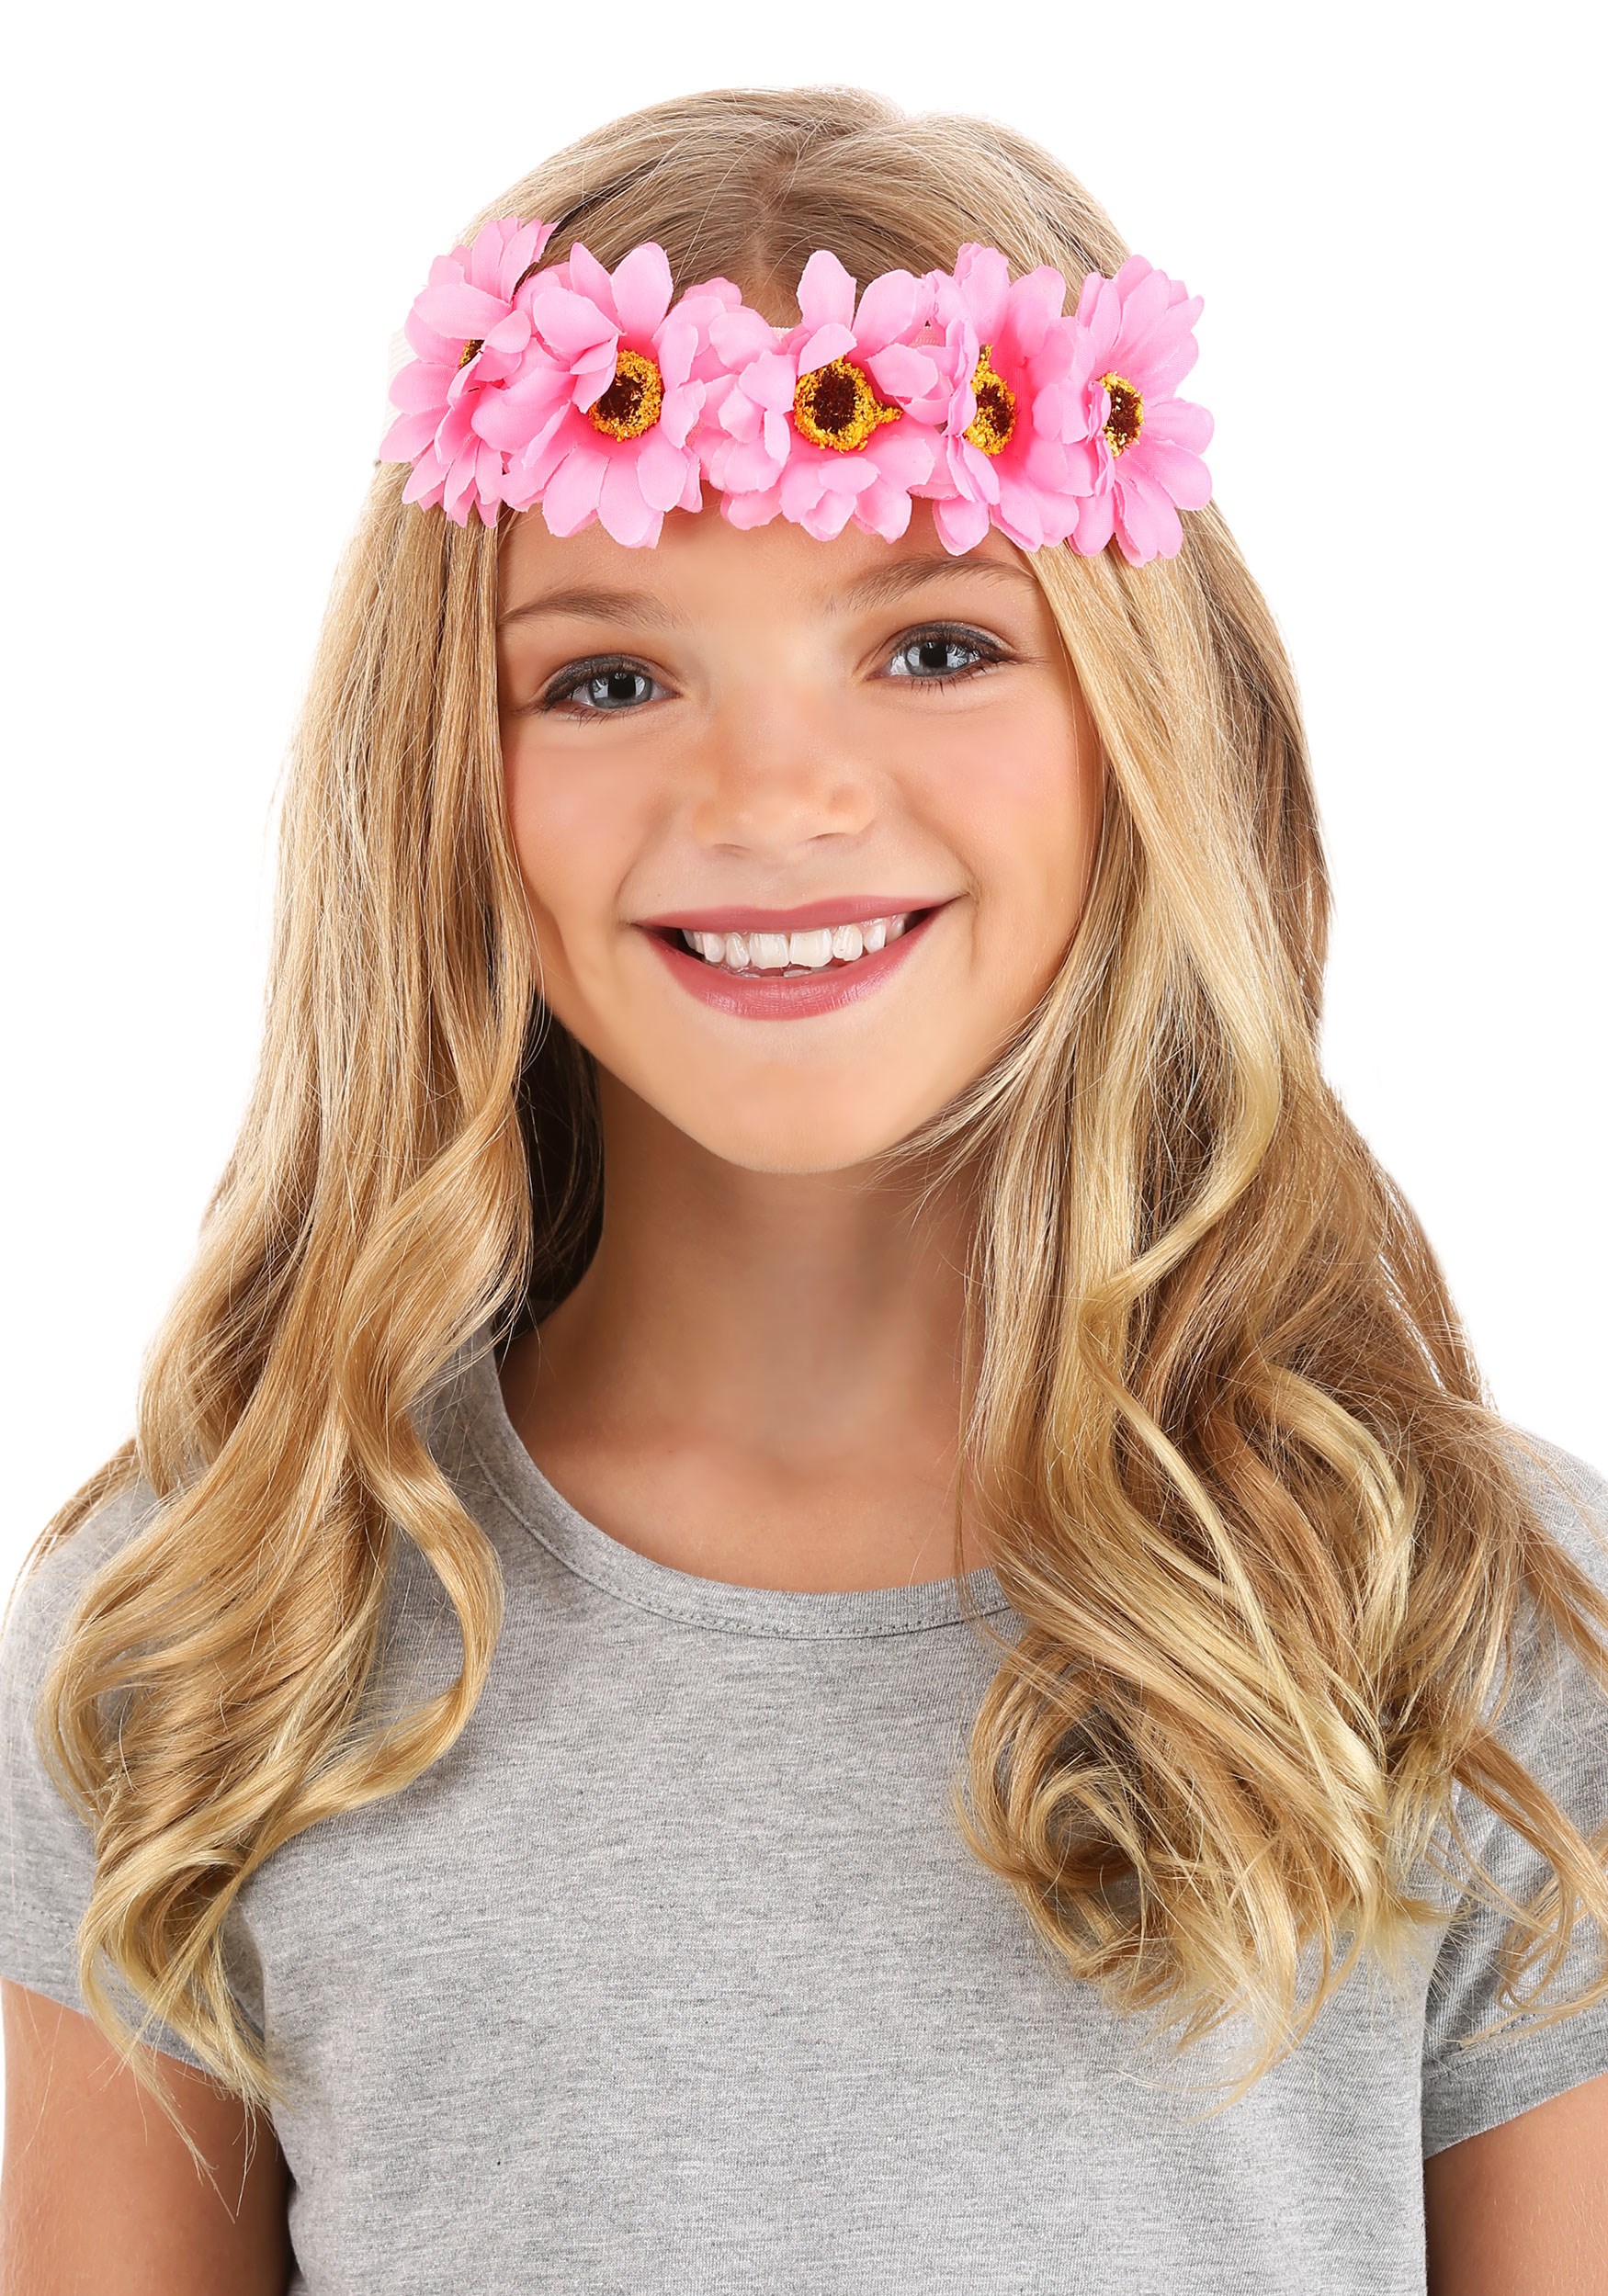 Darling Pink Daisy Crown Accessory